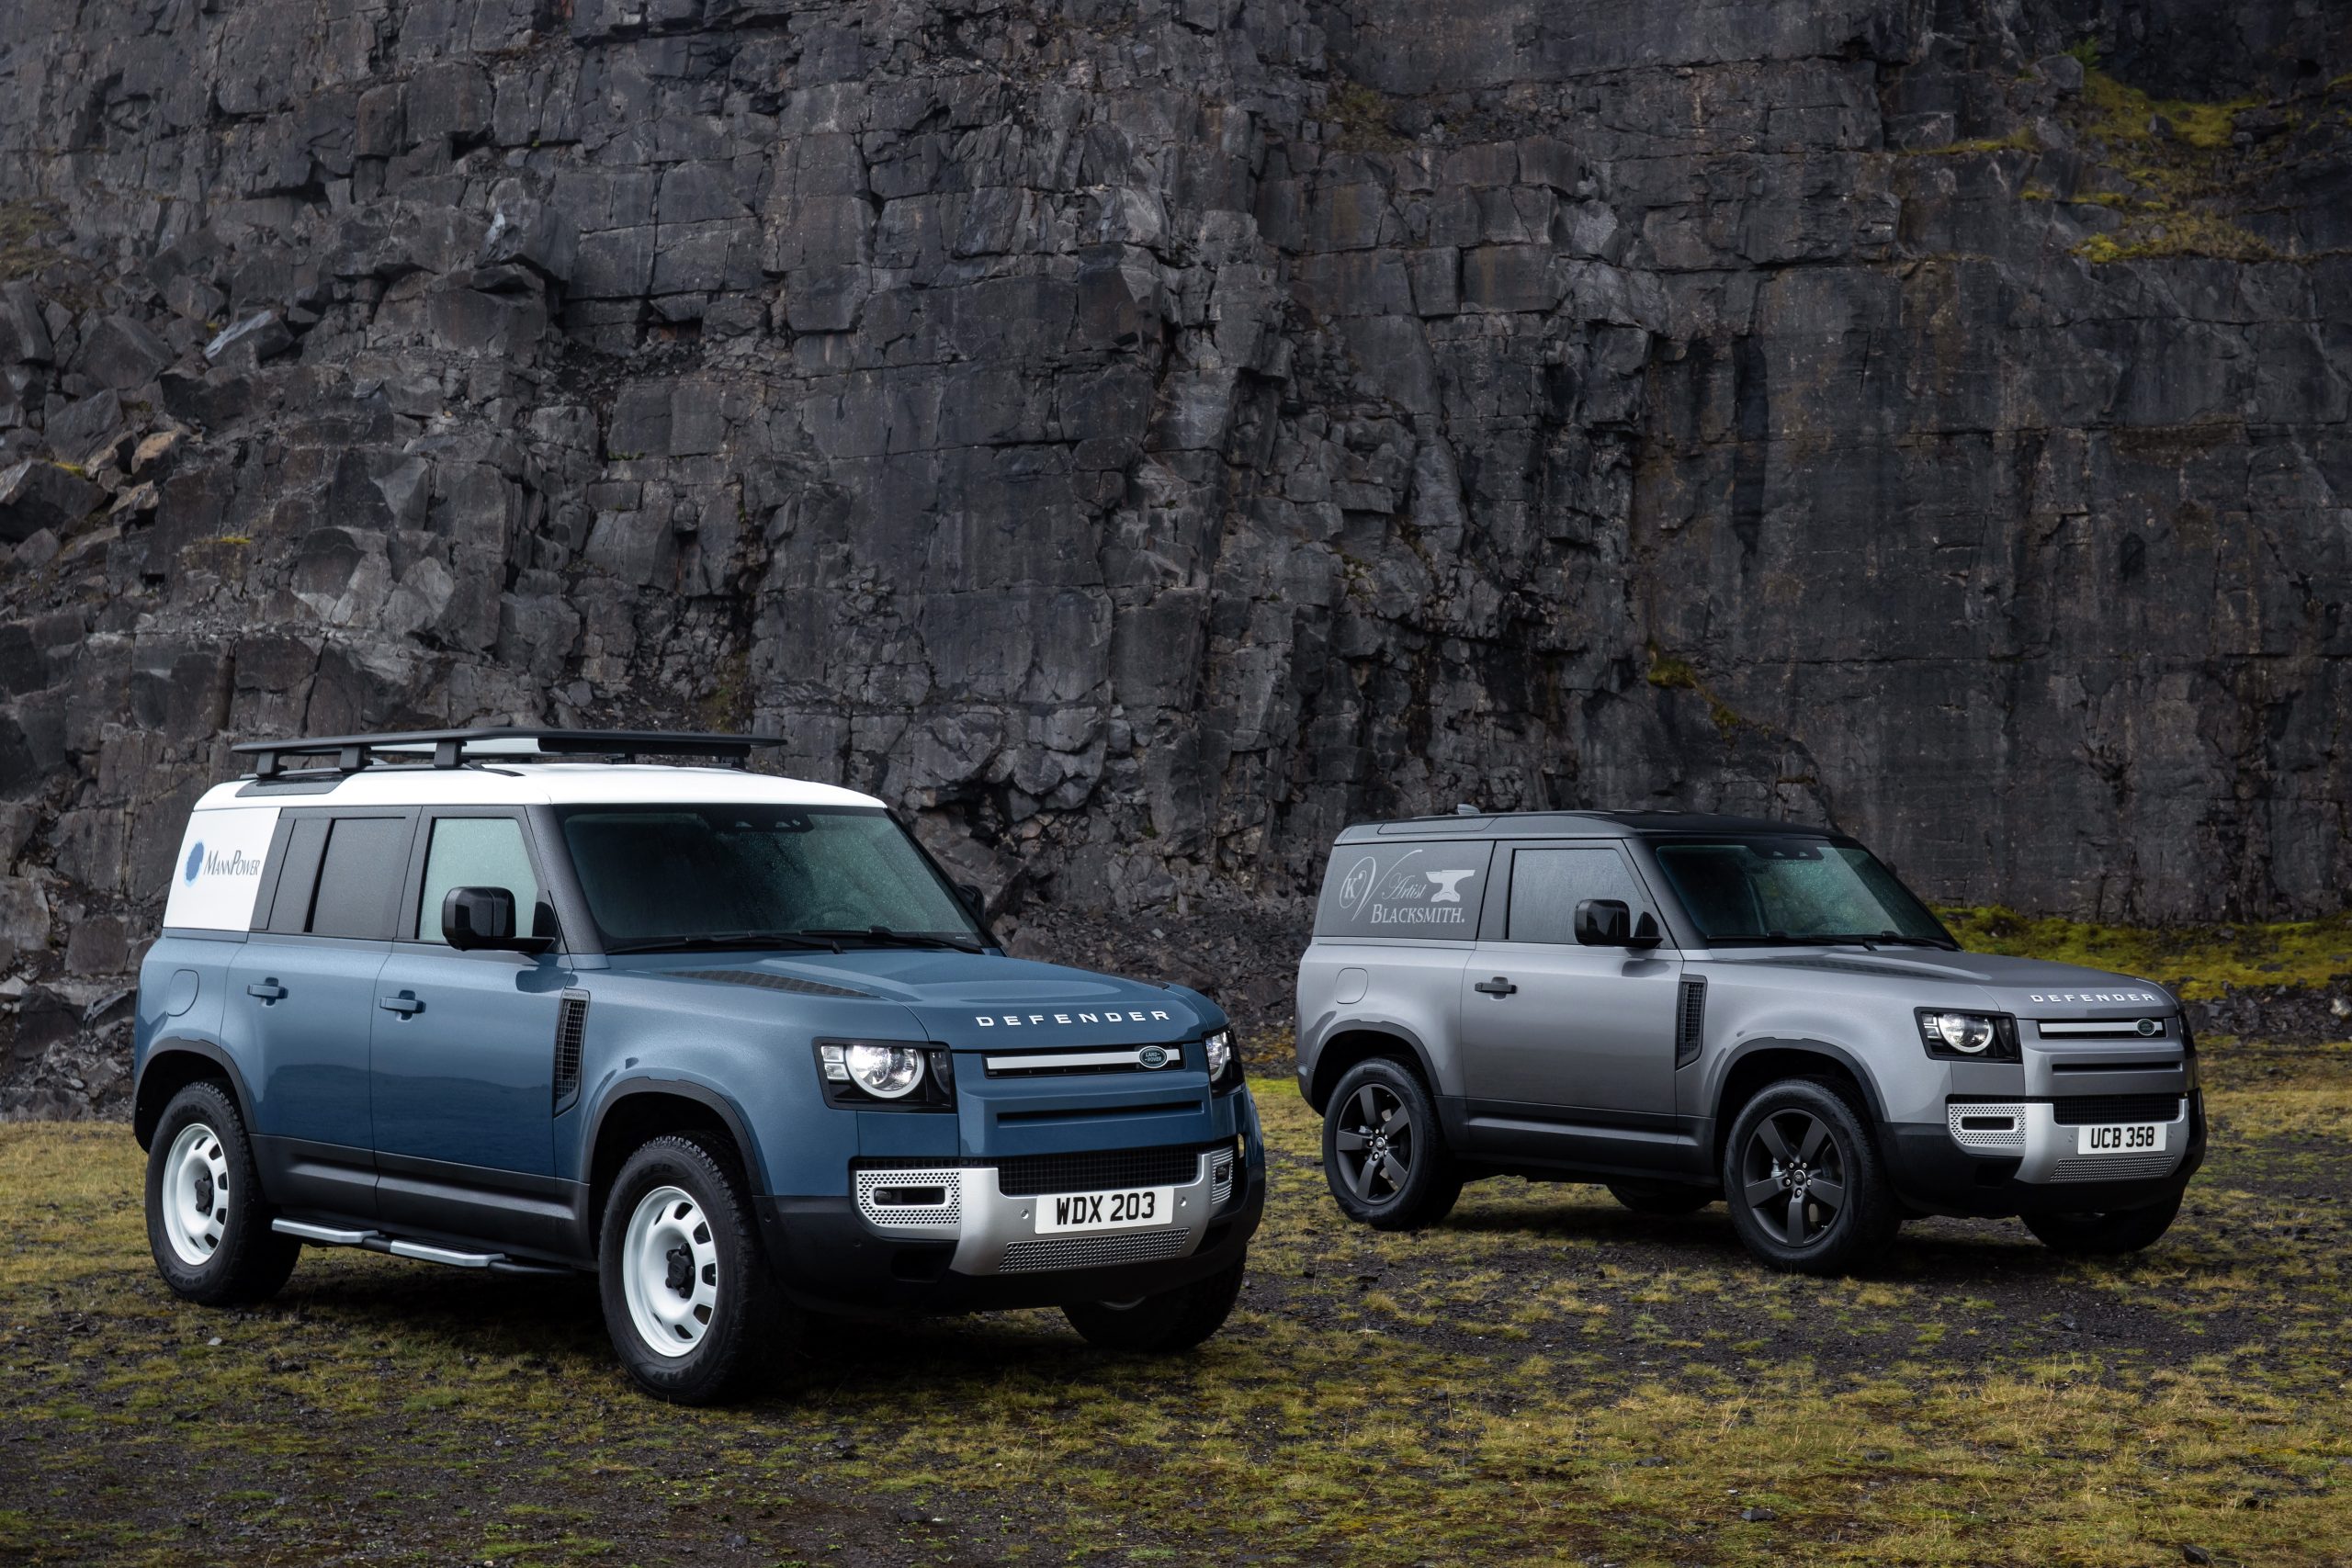 Land Rover Defender to launch in India